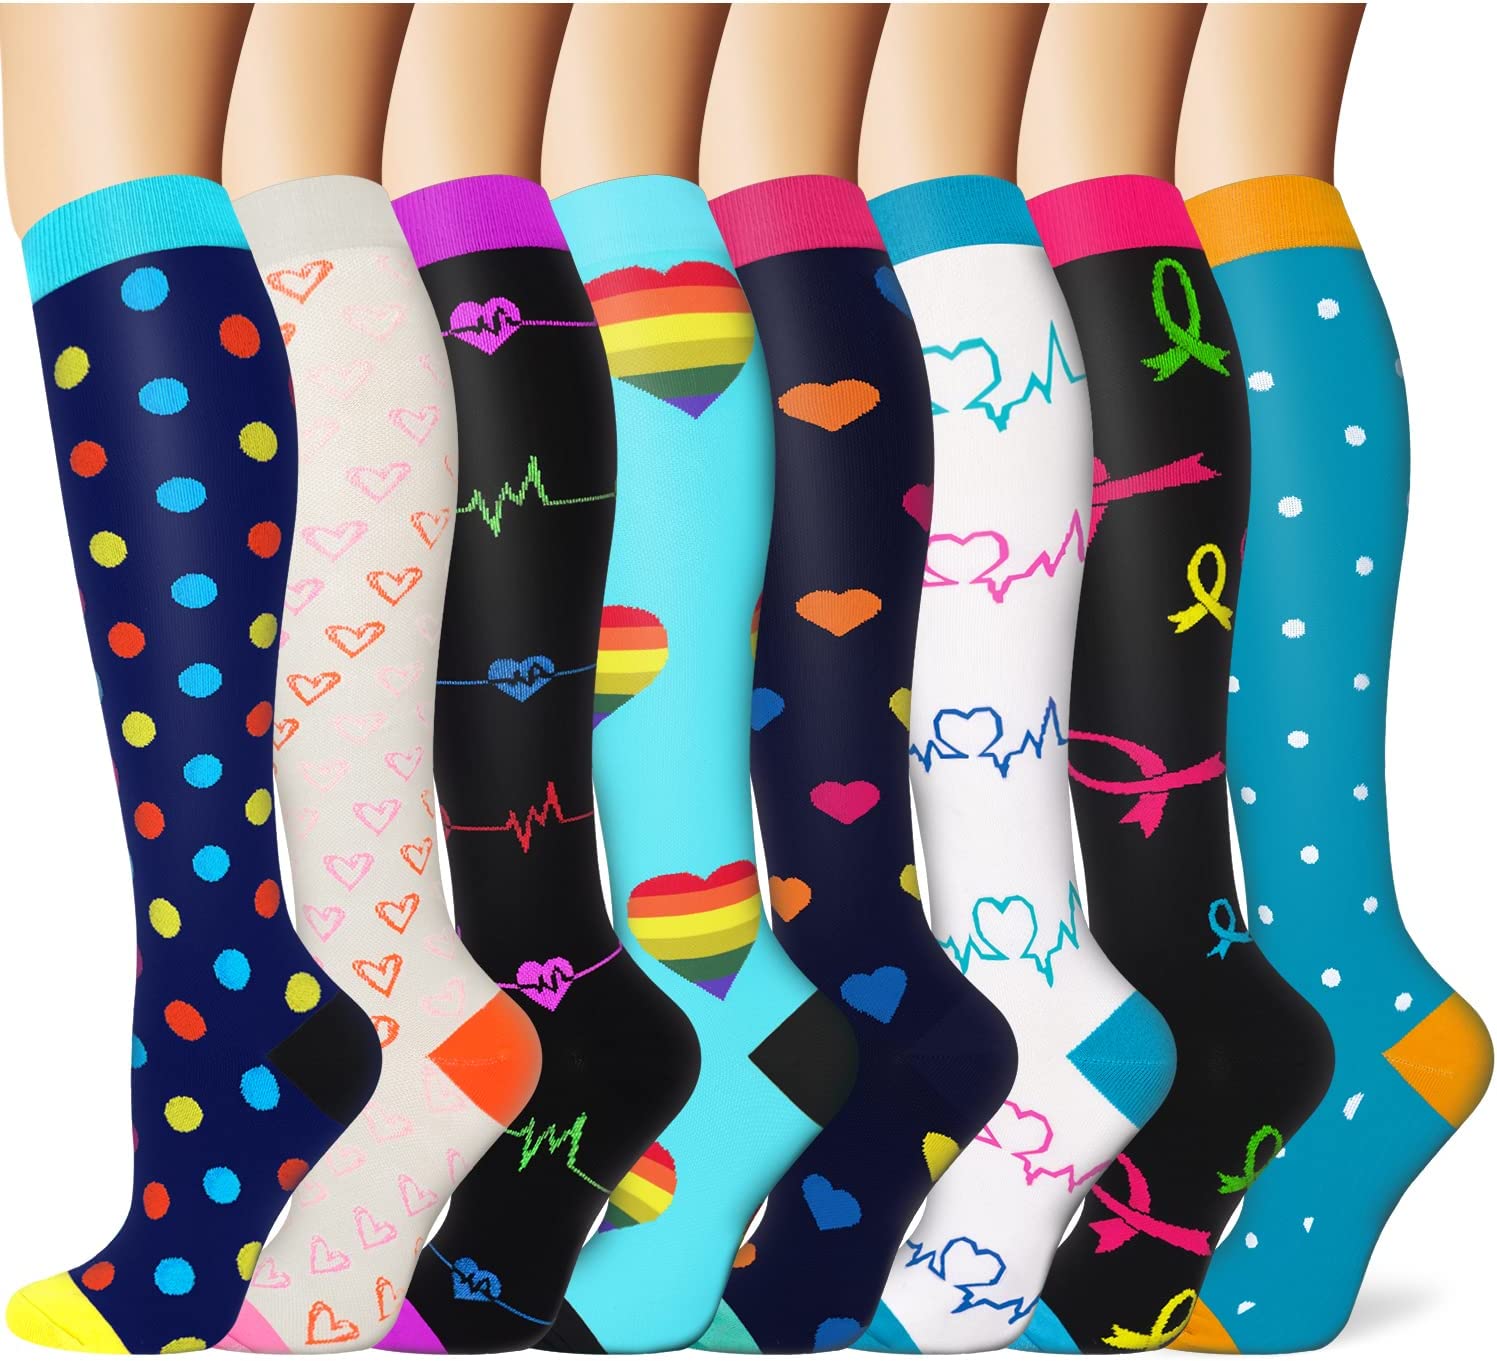 Iseasoo Cute Recovery Compression Socks For Women, 8-Pair